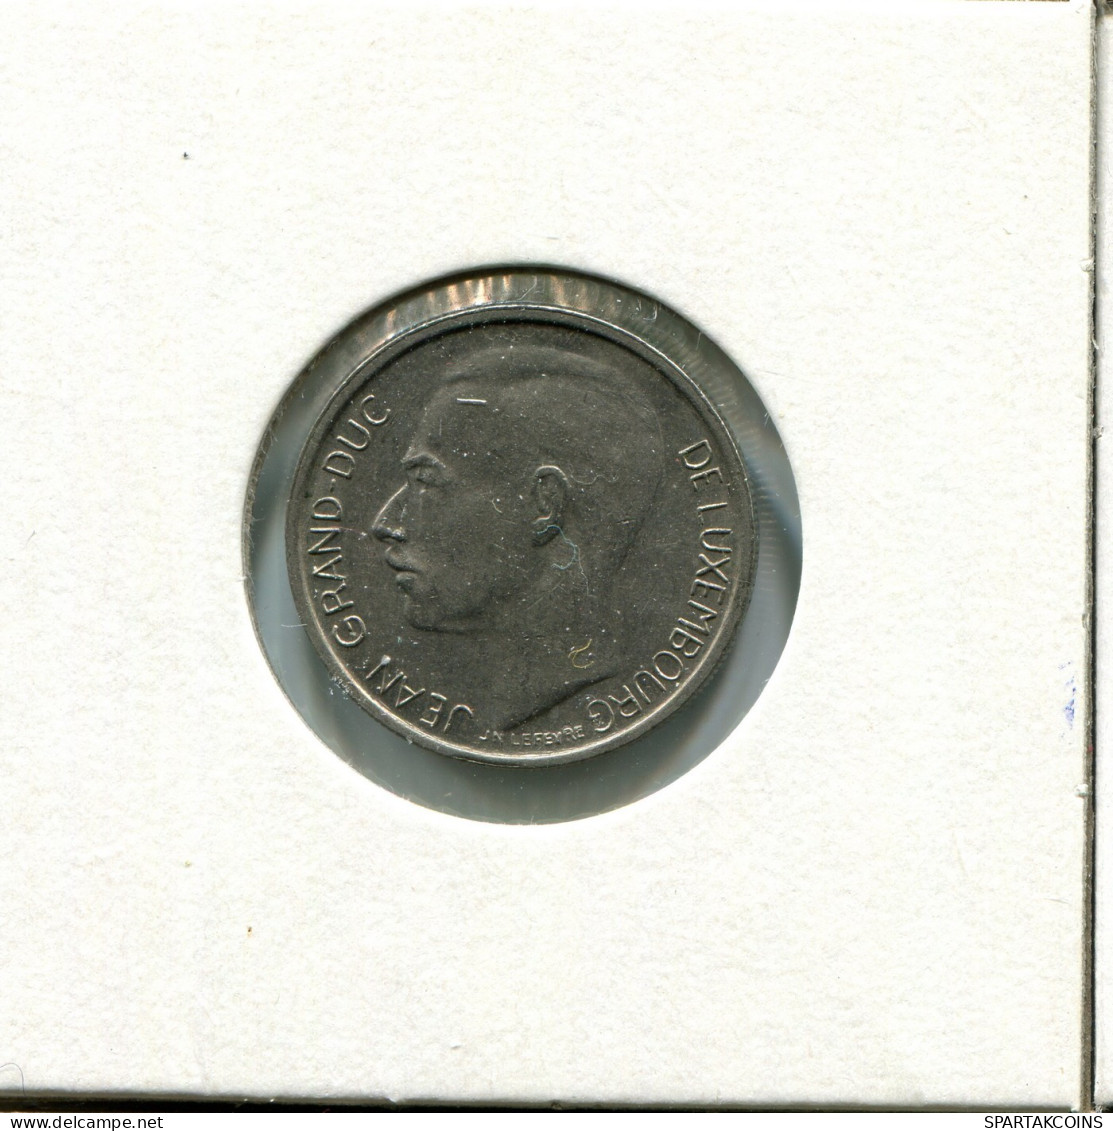 1 FRANC 1971 LUXEMBURG LUXEMBOURG Münze #AW833.D.A - Luxembourg